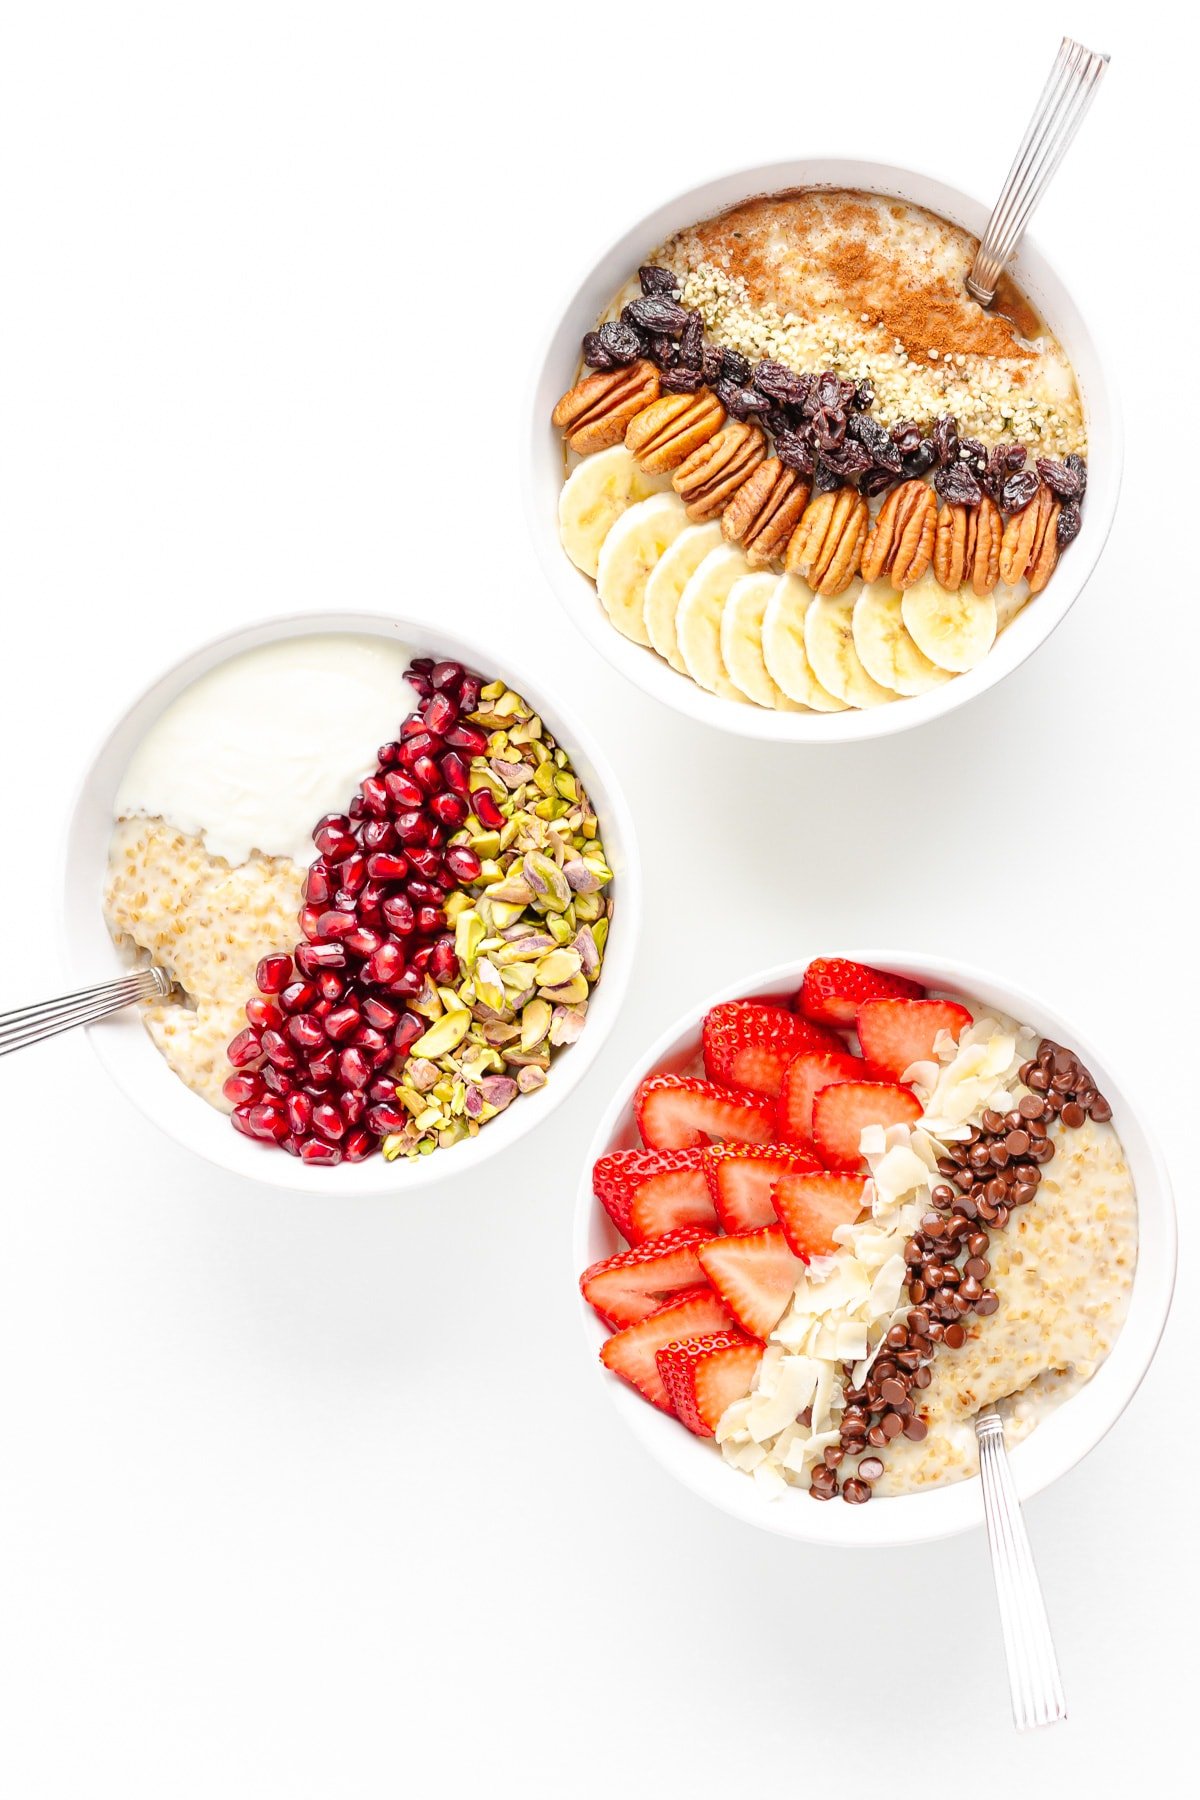 Three bowls of steel cuts oats with different toppings on a white background.